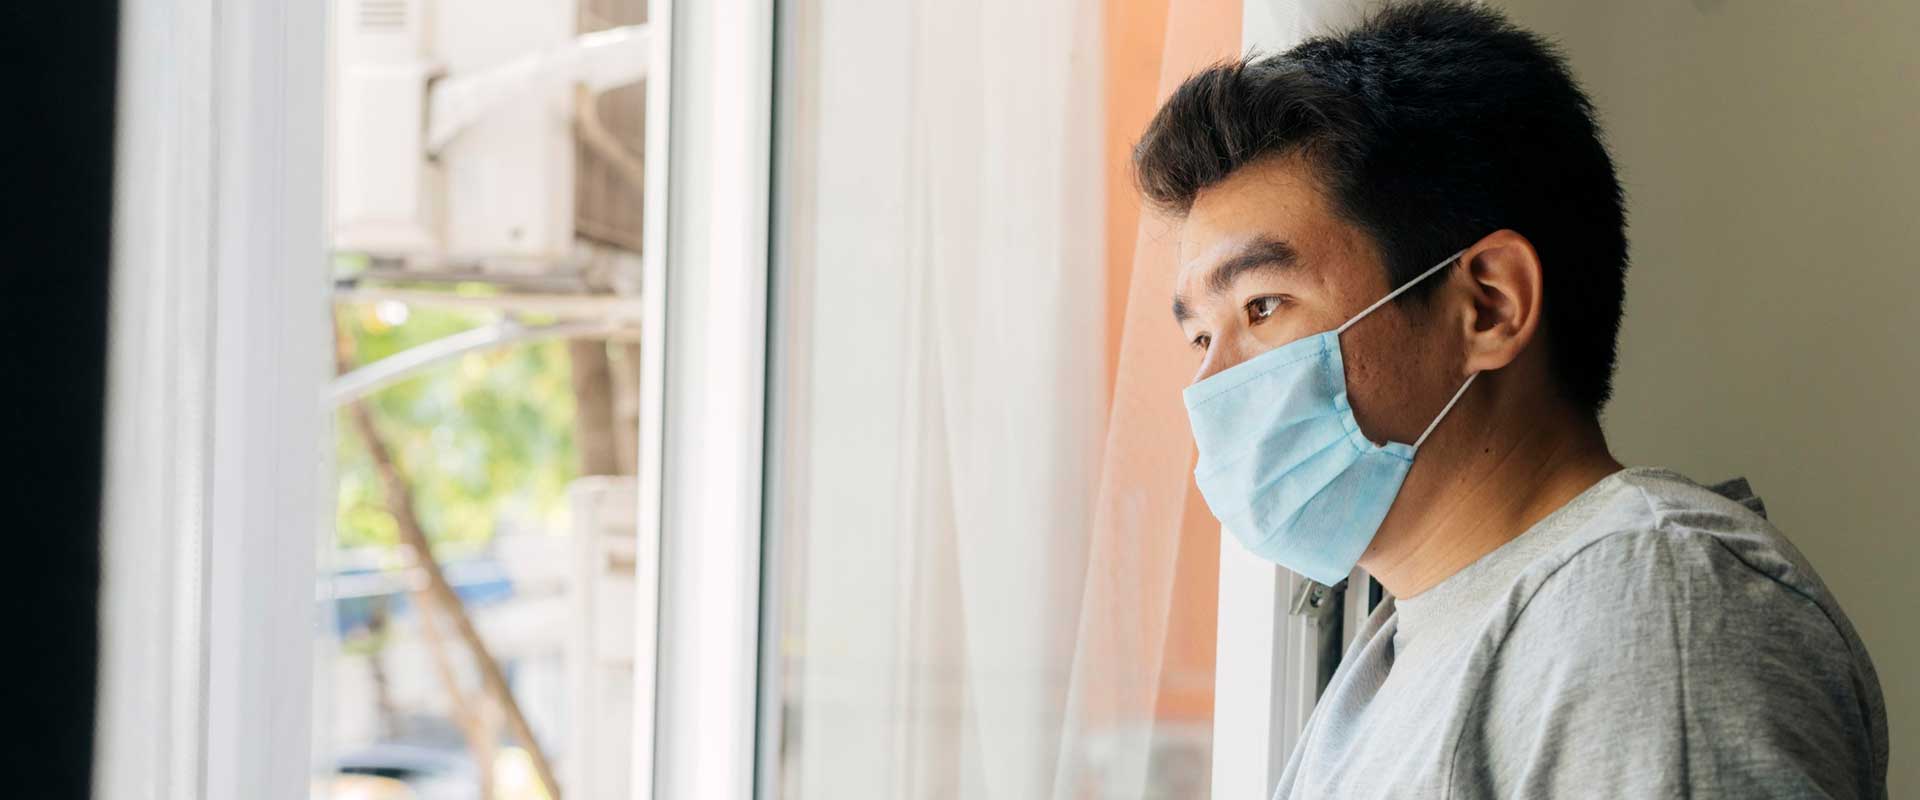 side-view-man-with-medical-mask-home-during-pandemic-looking-through-window